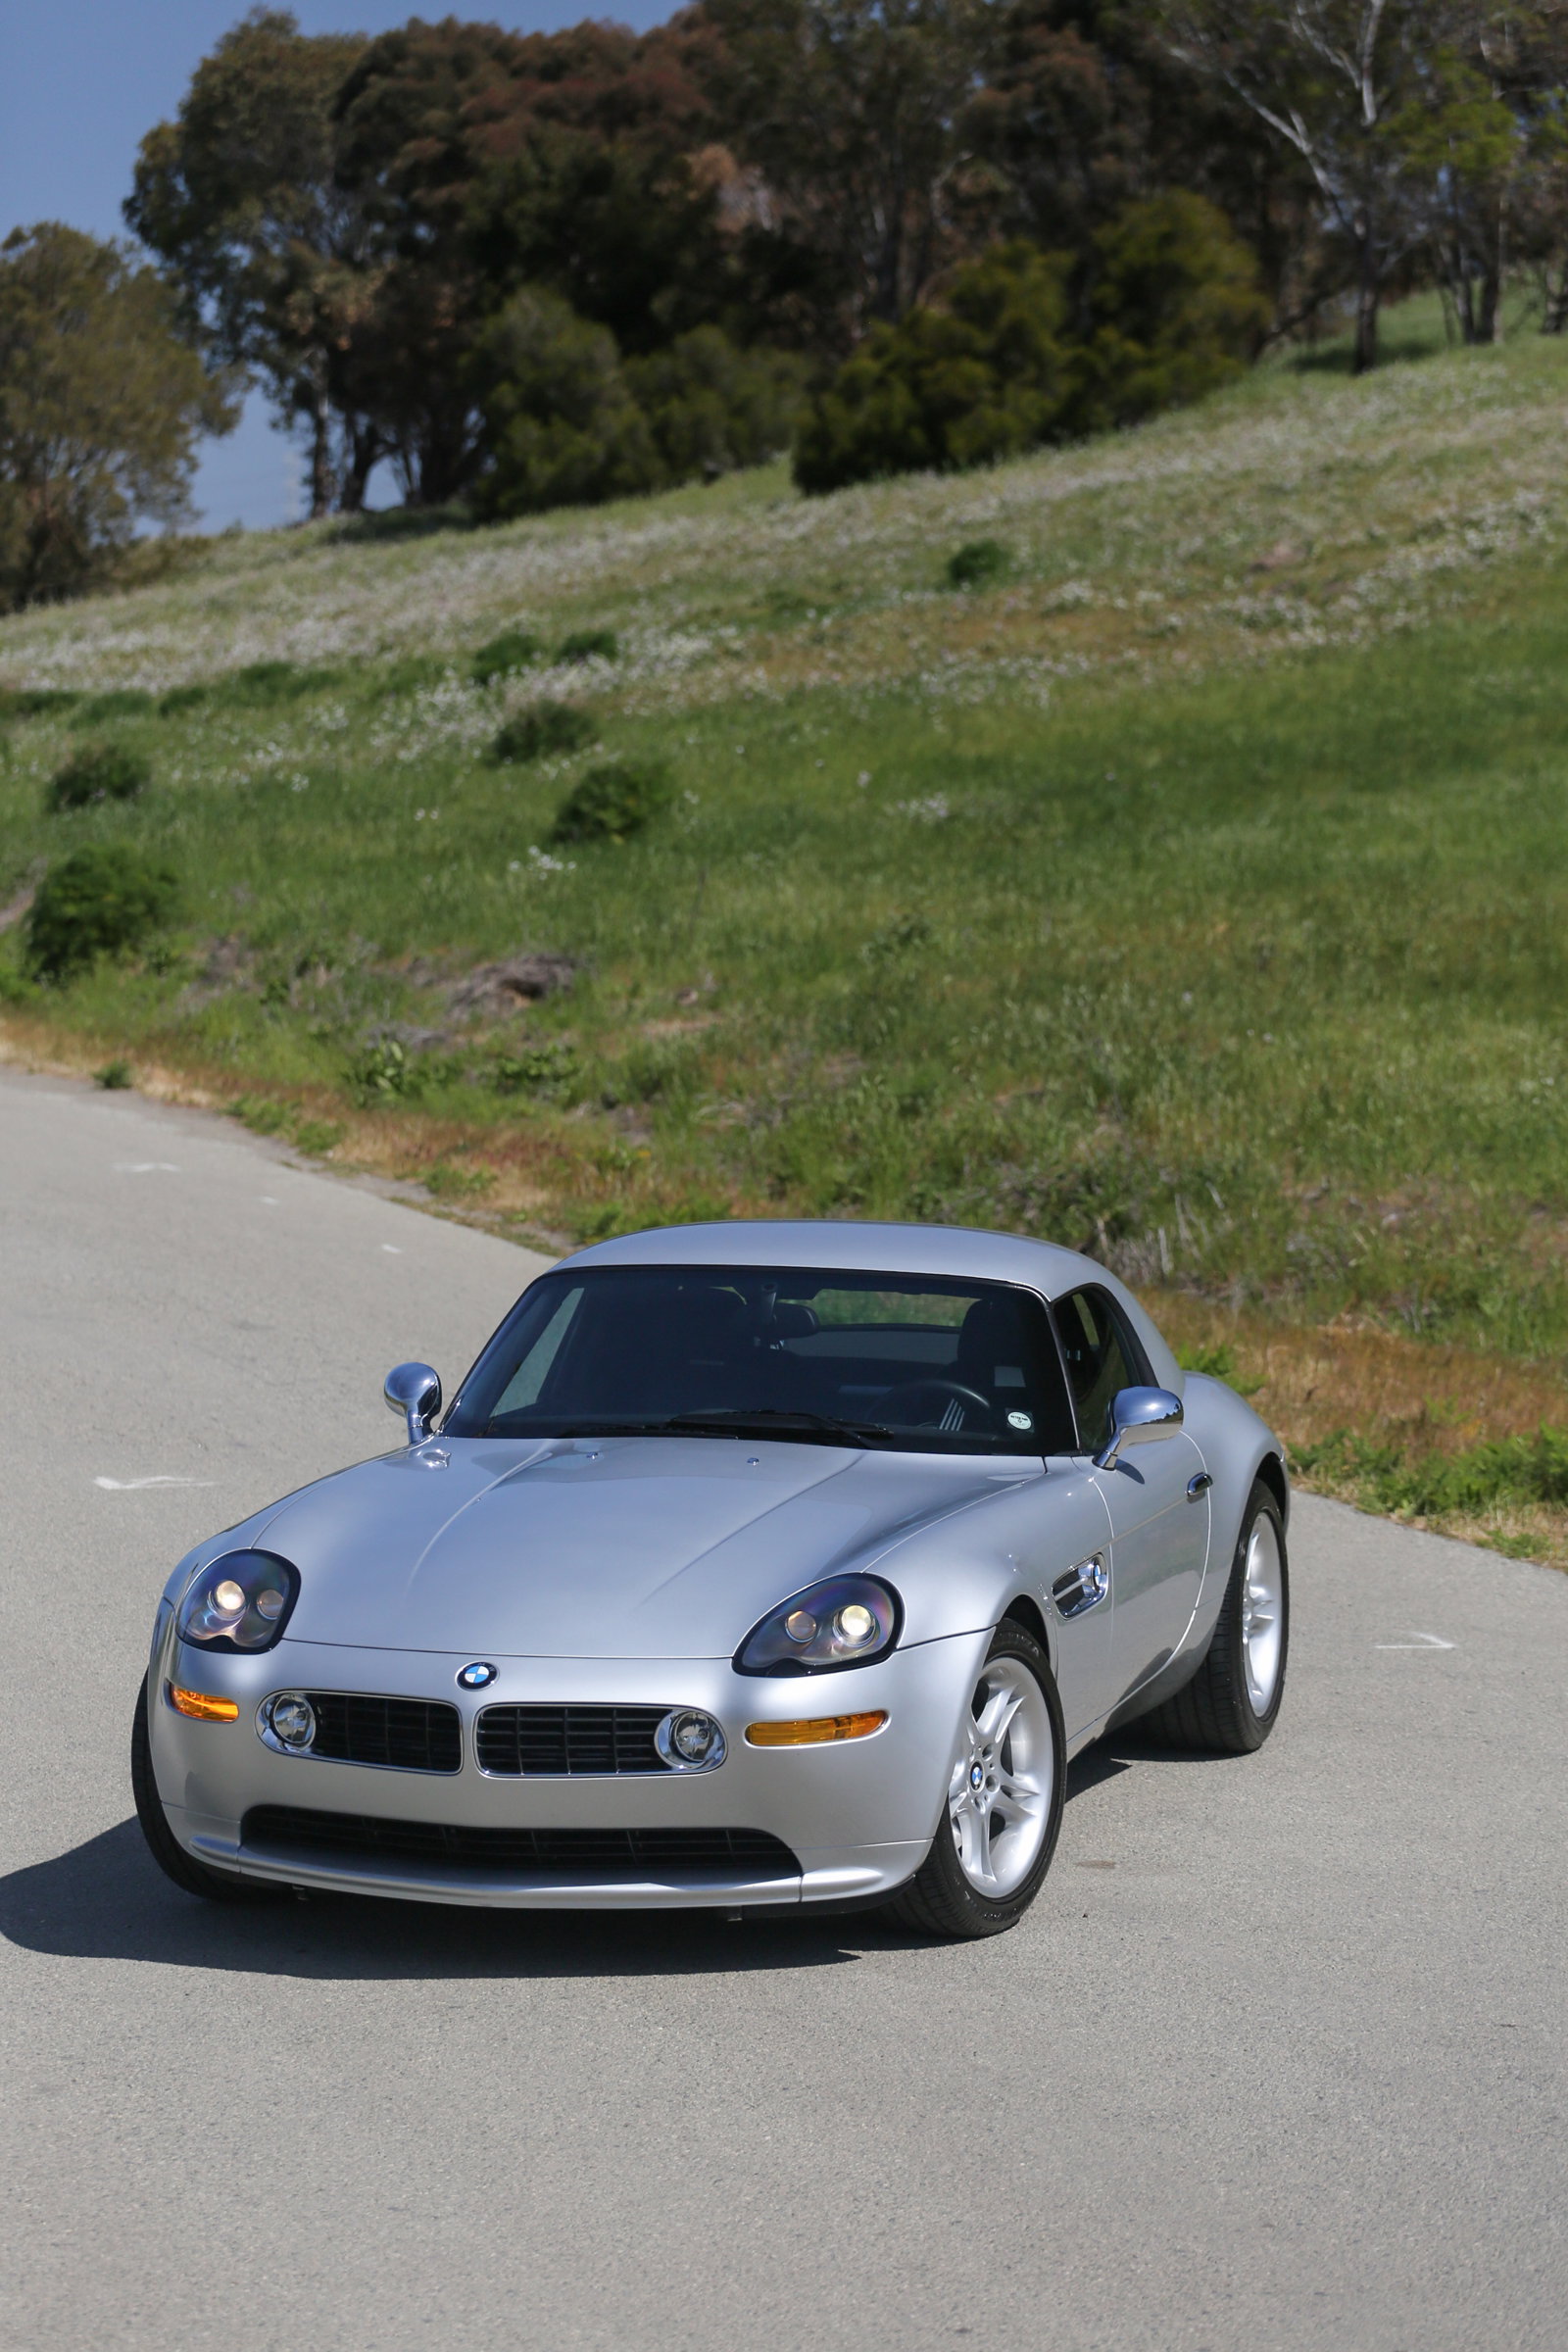 2002 BMW Z8 sold at ISSIMI